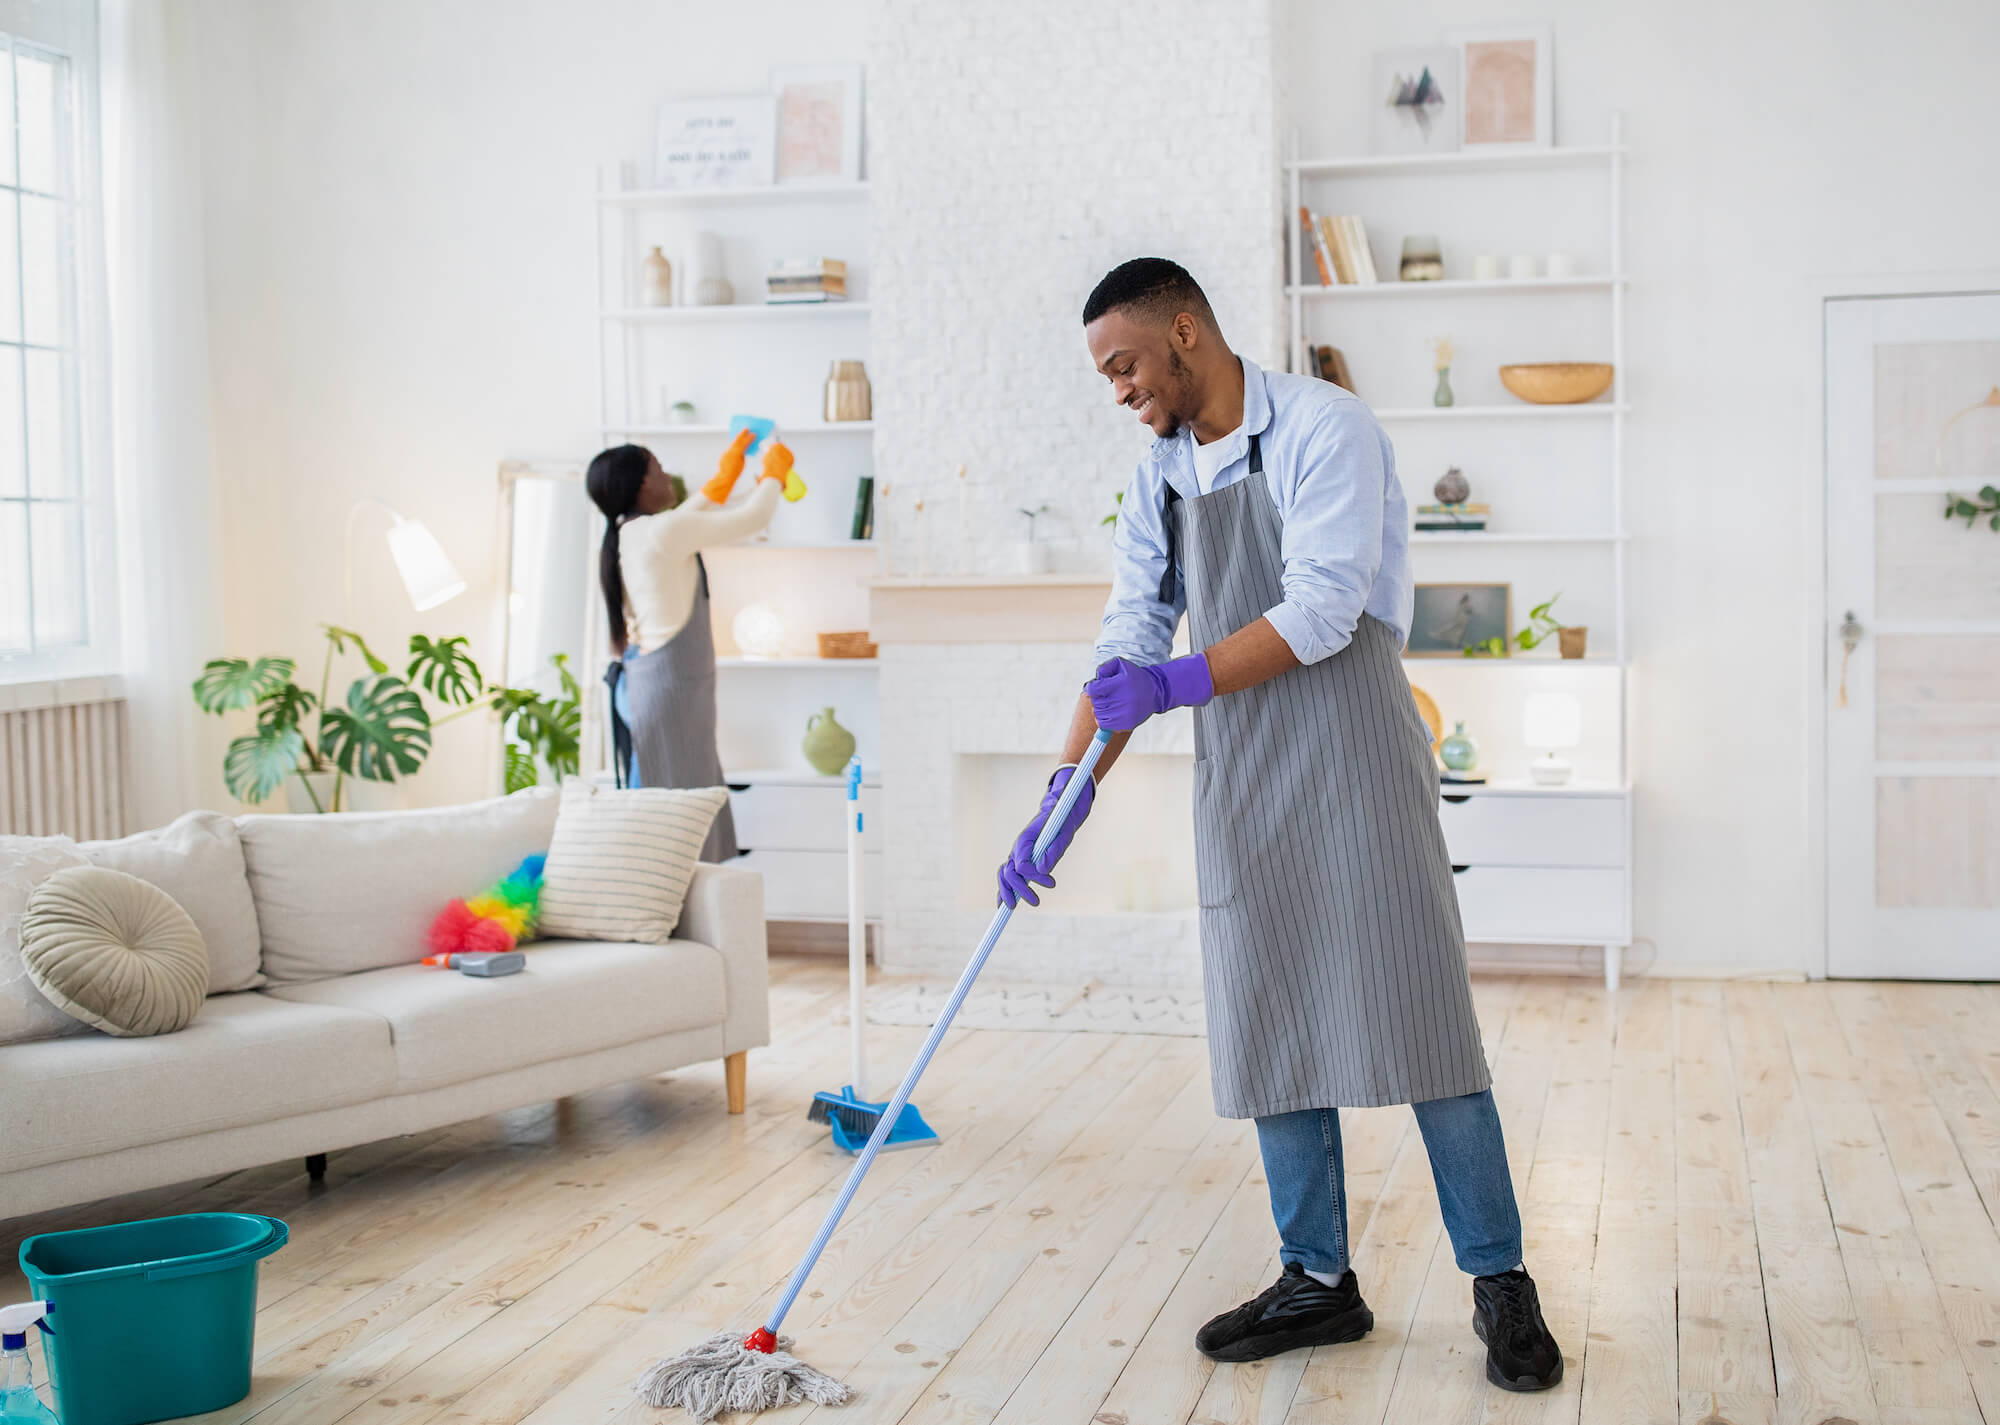 housekeeping services near me, luxury housekeeper jobs near me, housekeeper job agency